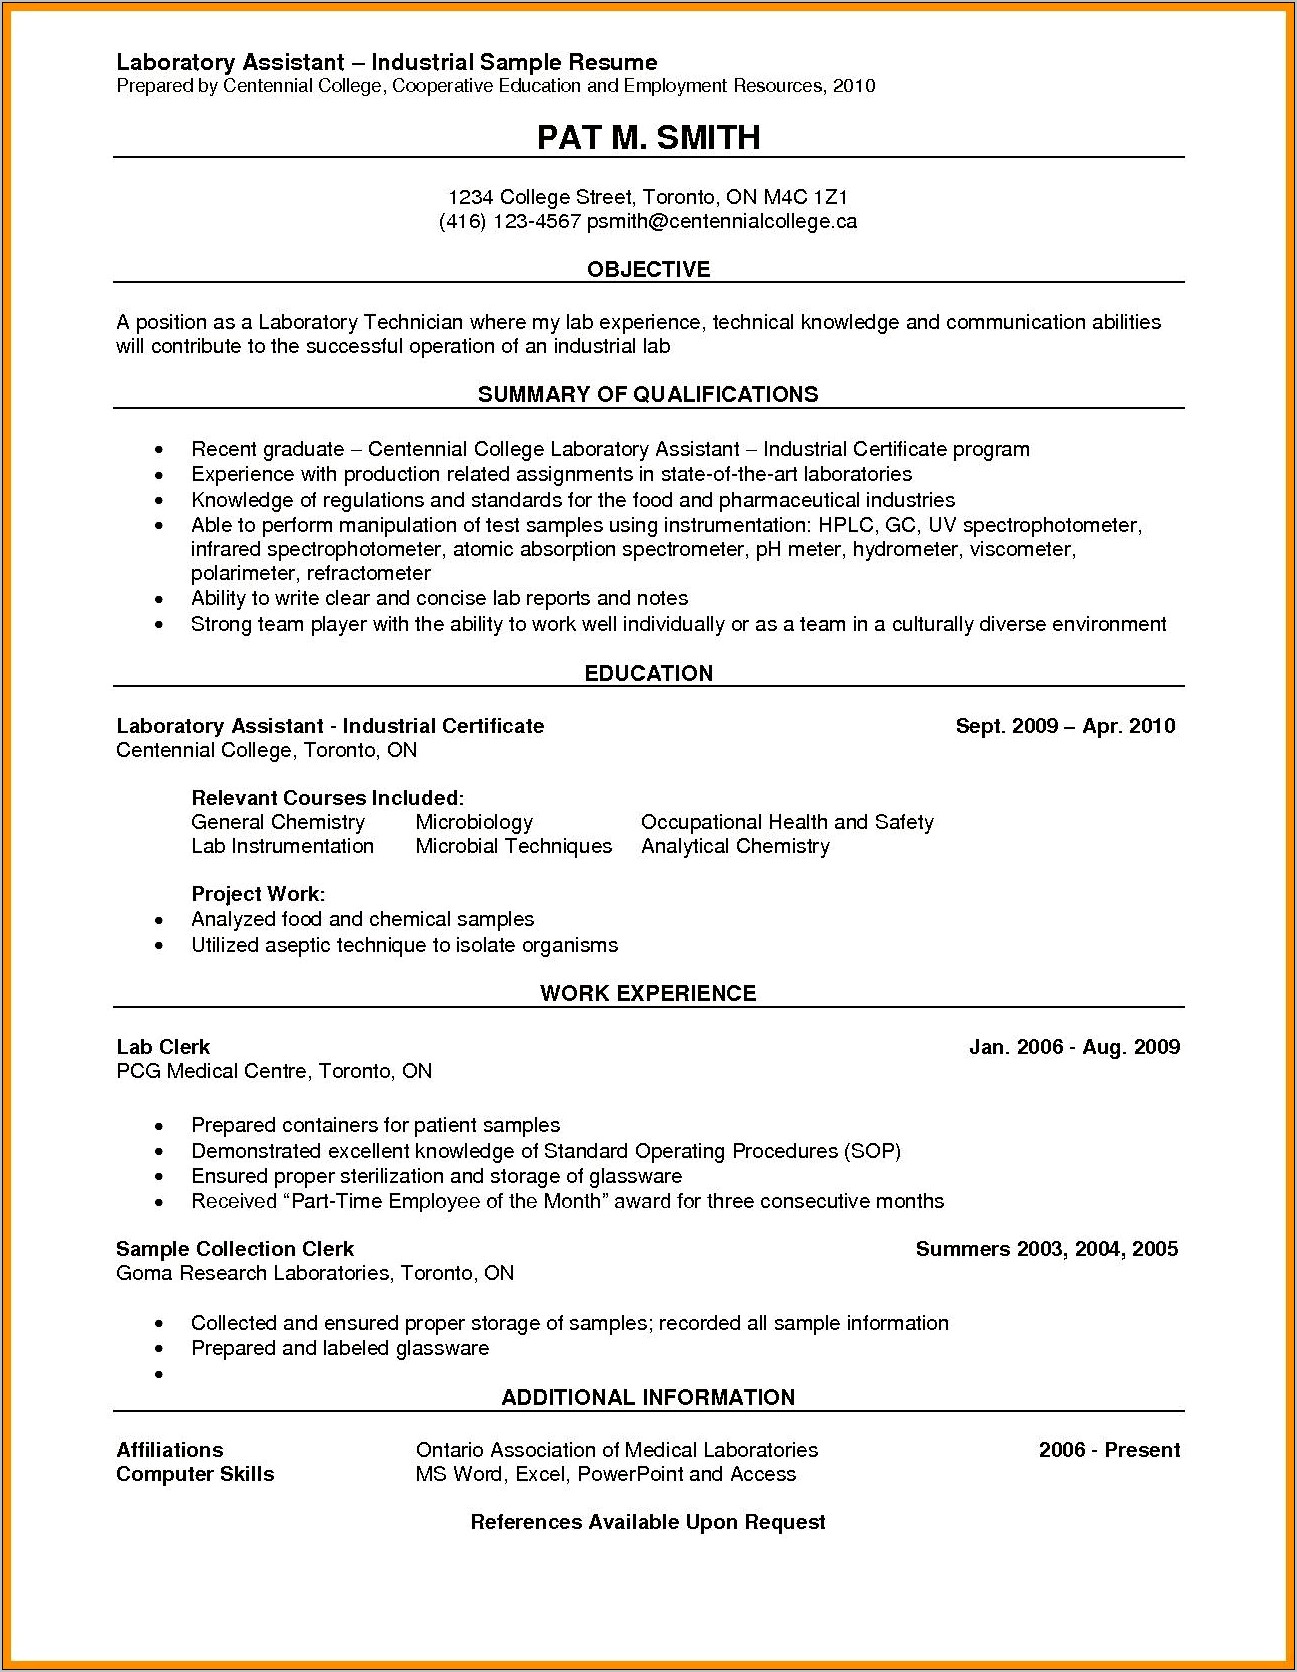 Resume Objective About Working In A Laboratory